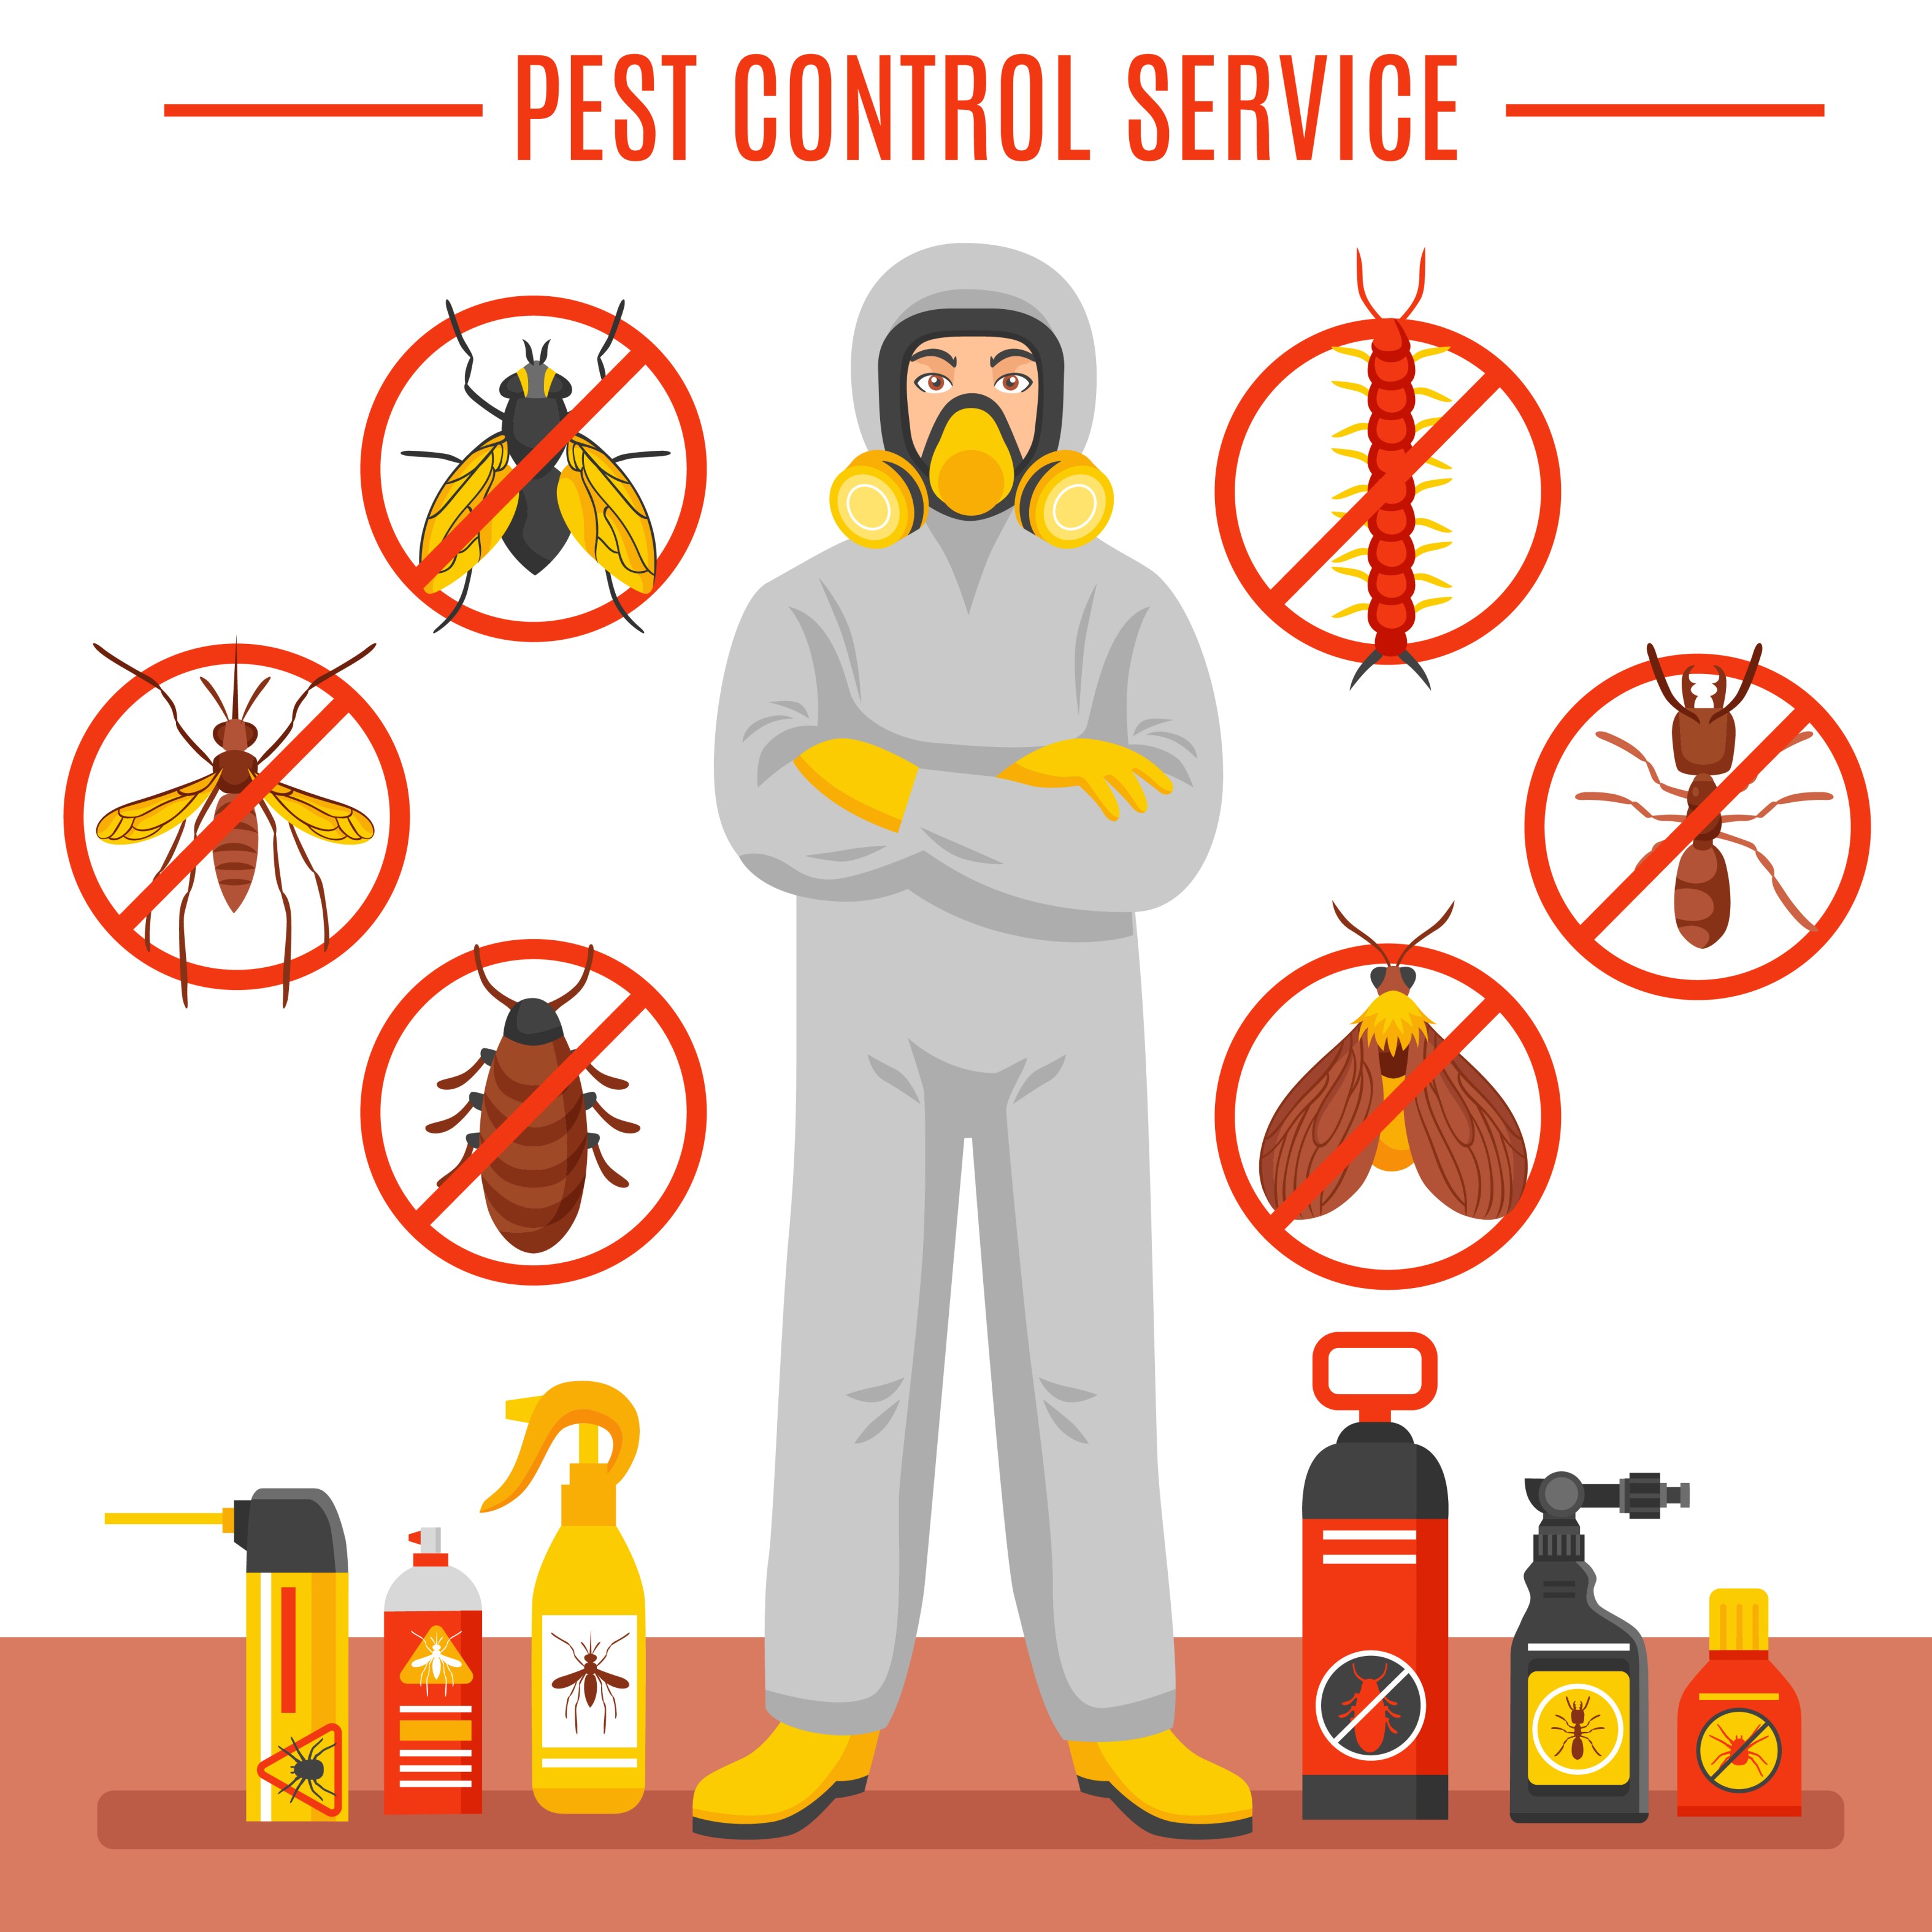 Why Pest Control Services Matter​